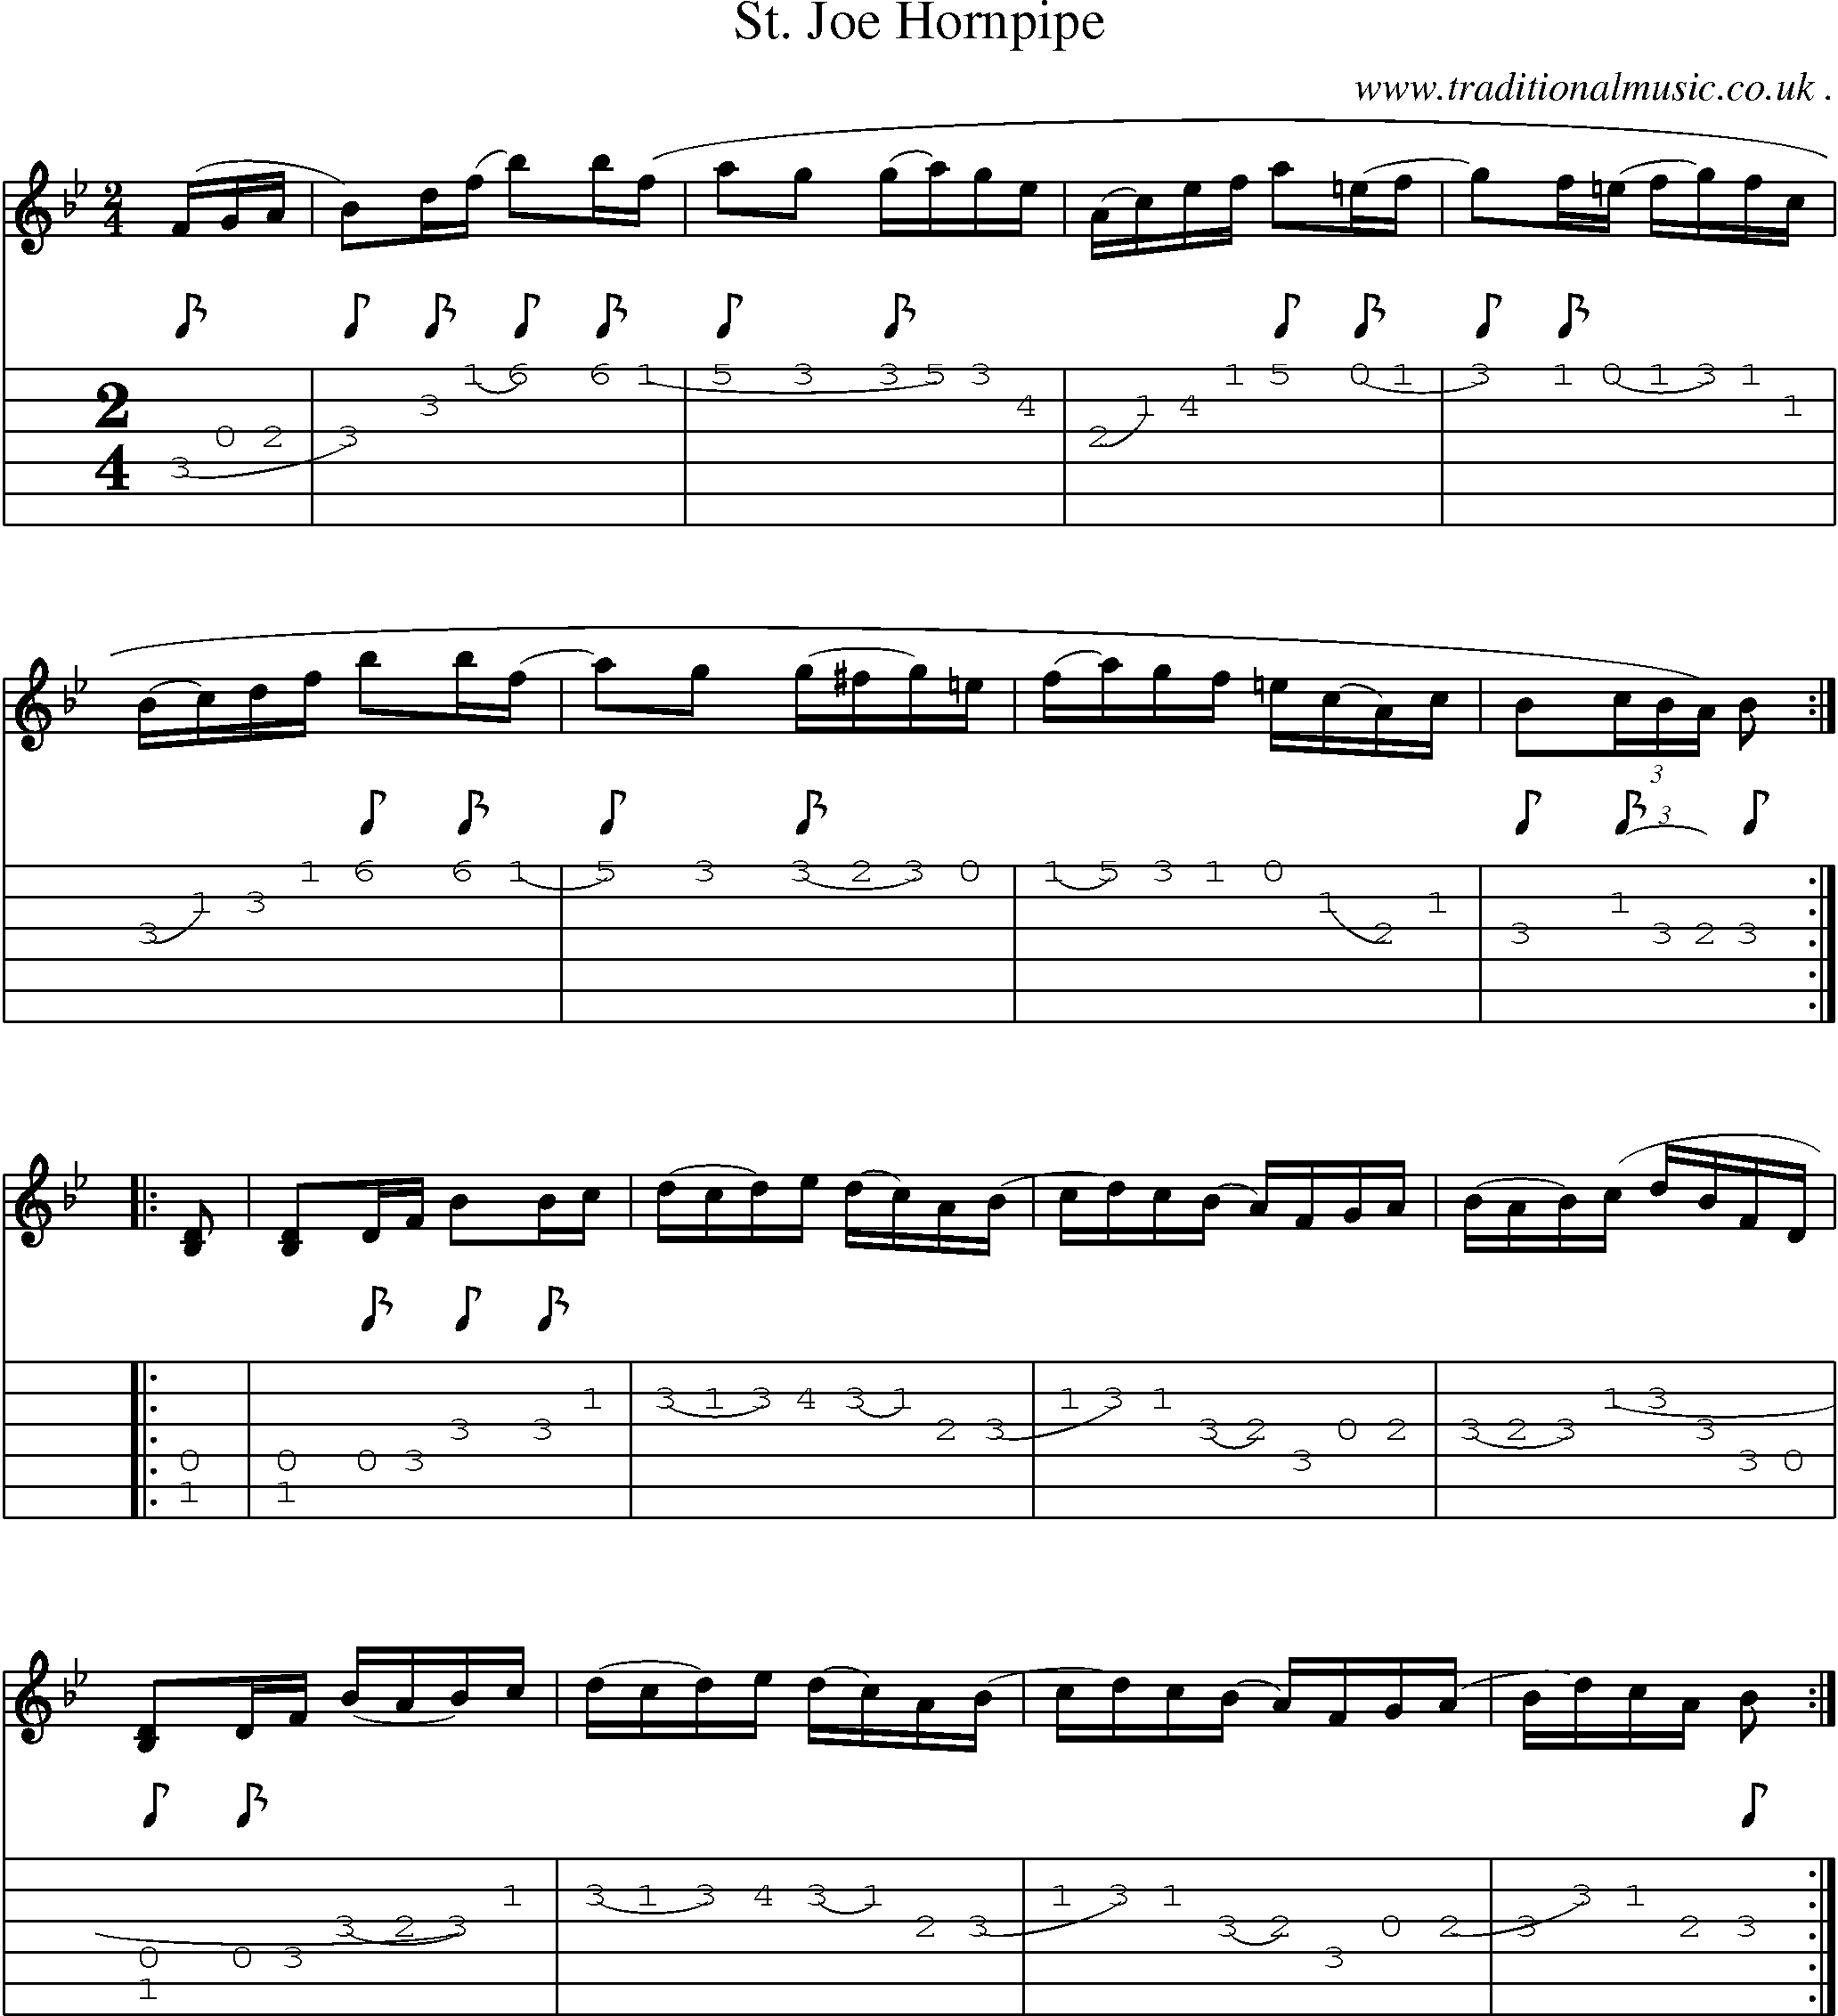 Sheet-Music and Guitar Tabs for St Joe Hornpipe